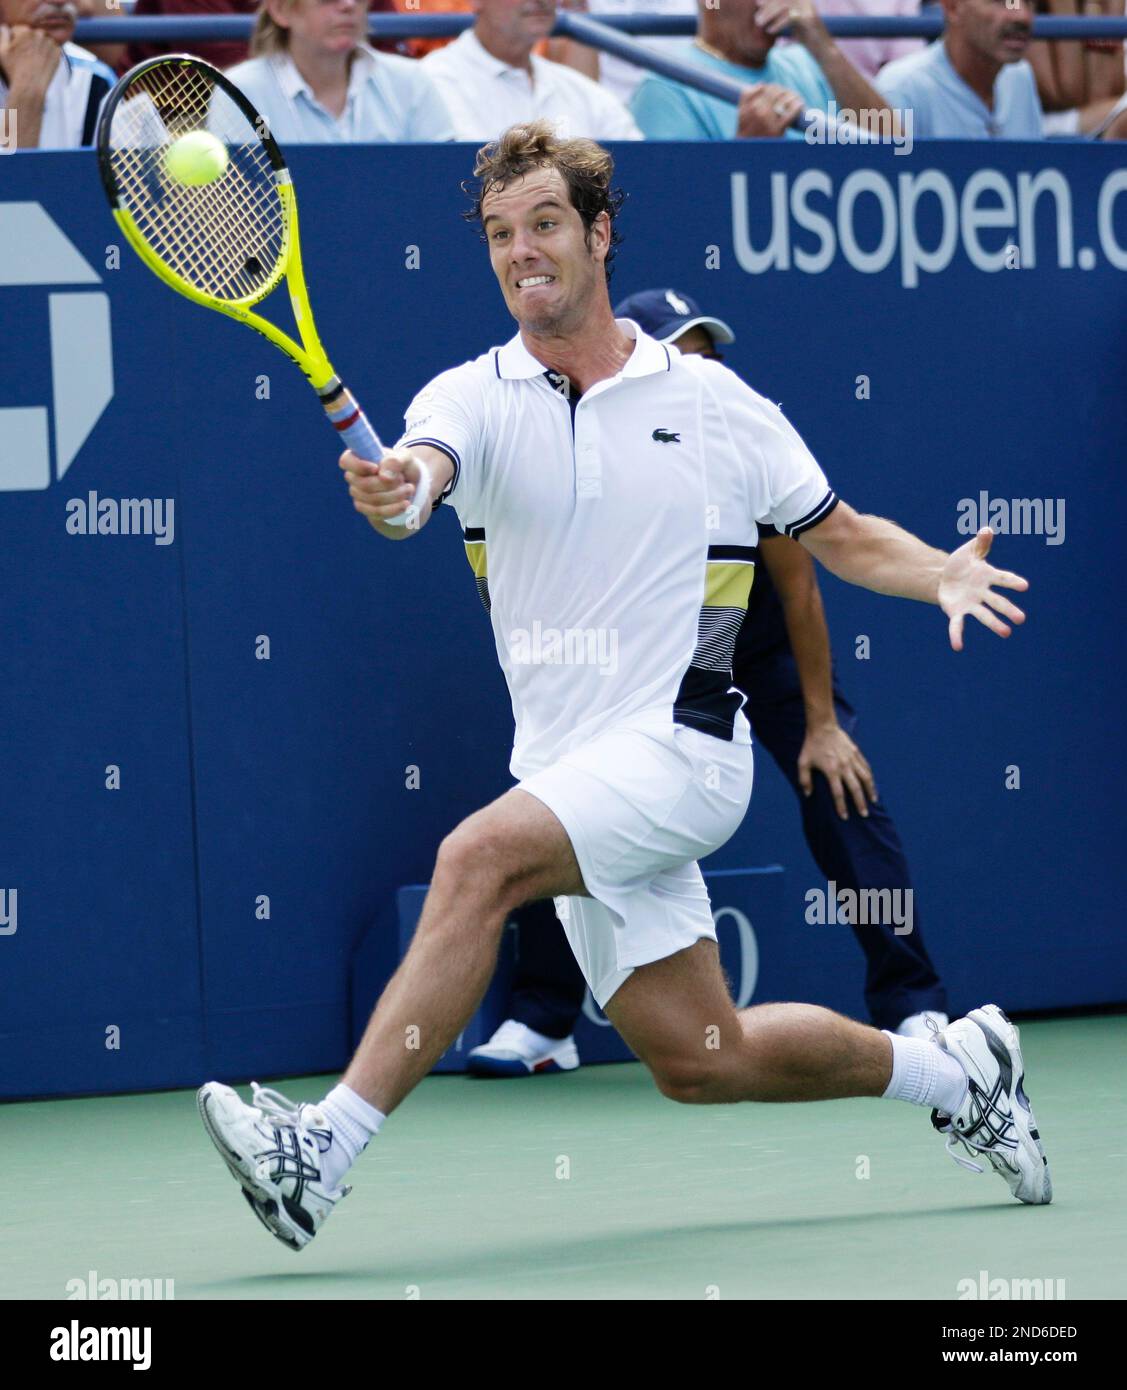 Richard Gasquet of France returns the ball to Nikolay Davydenko of Russia at the U.S. Open tennis tournament in New York, Thursday, Sept. 2, 2010